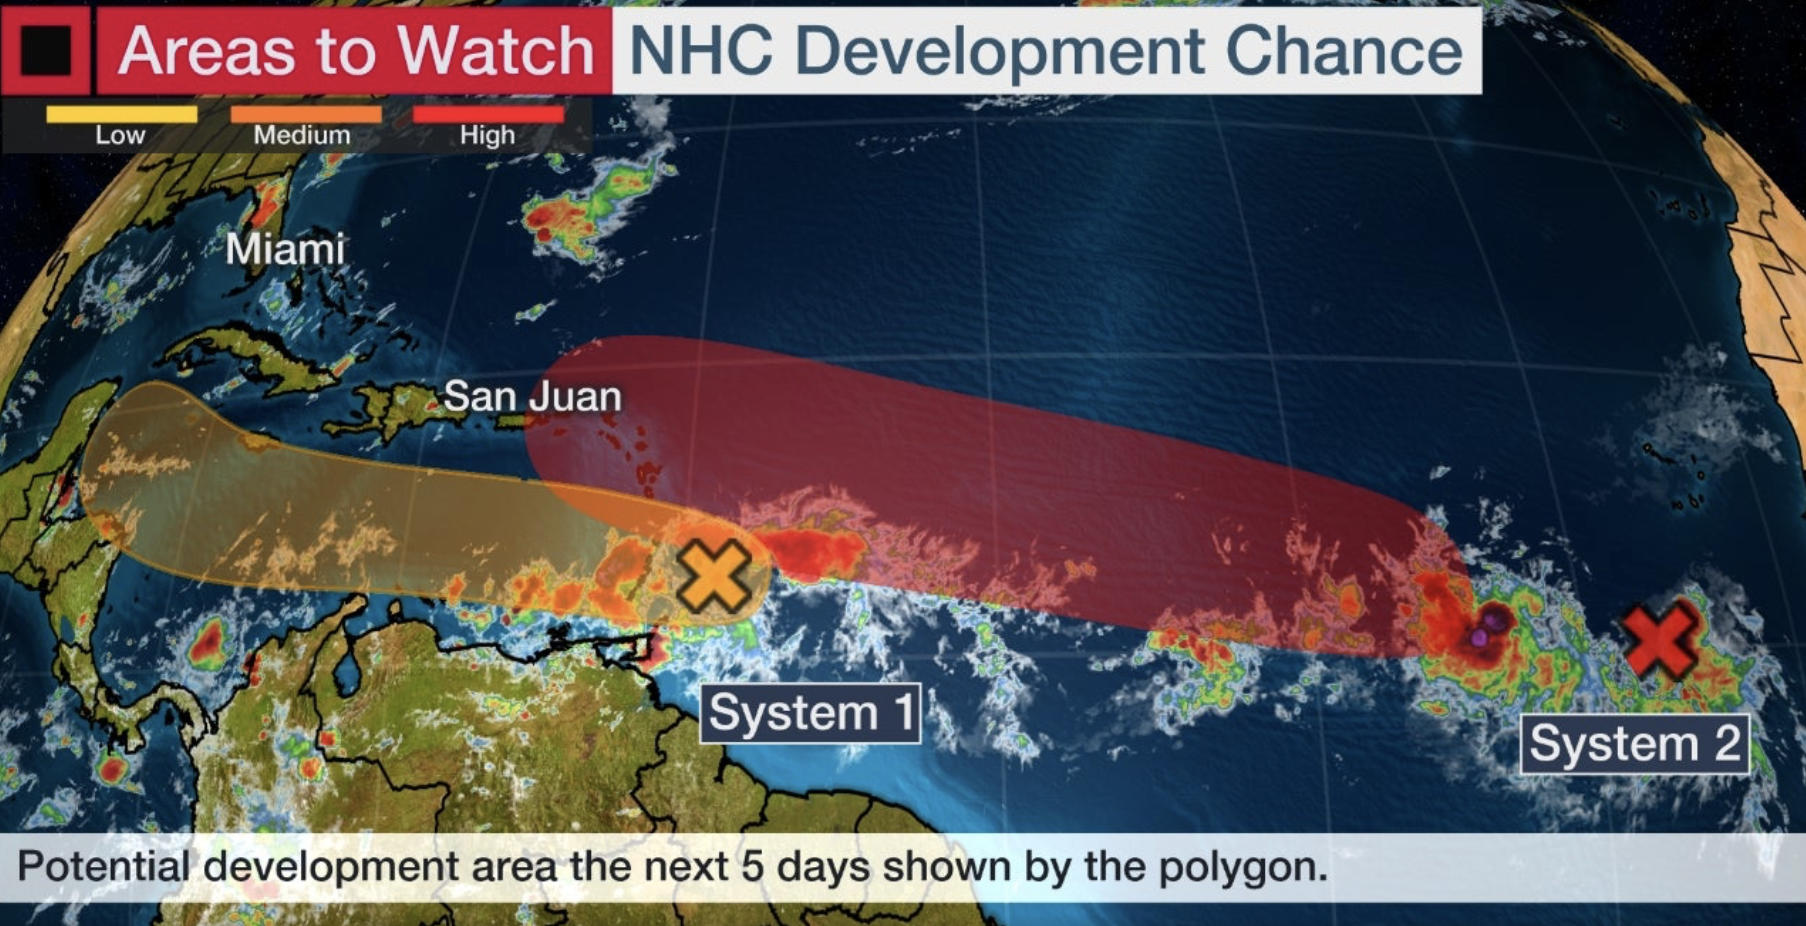 Two New Atlantic Systems: Storms to Come?